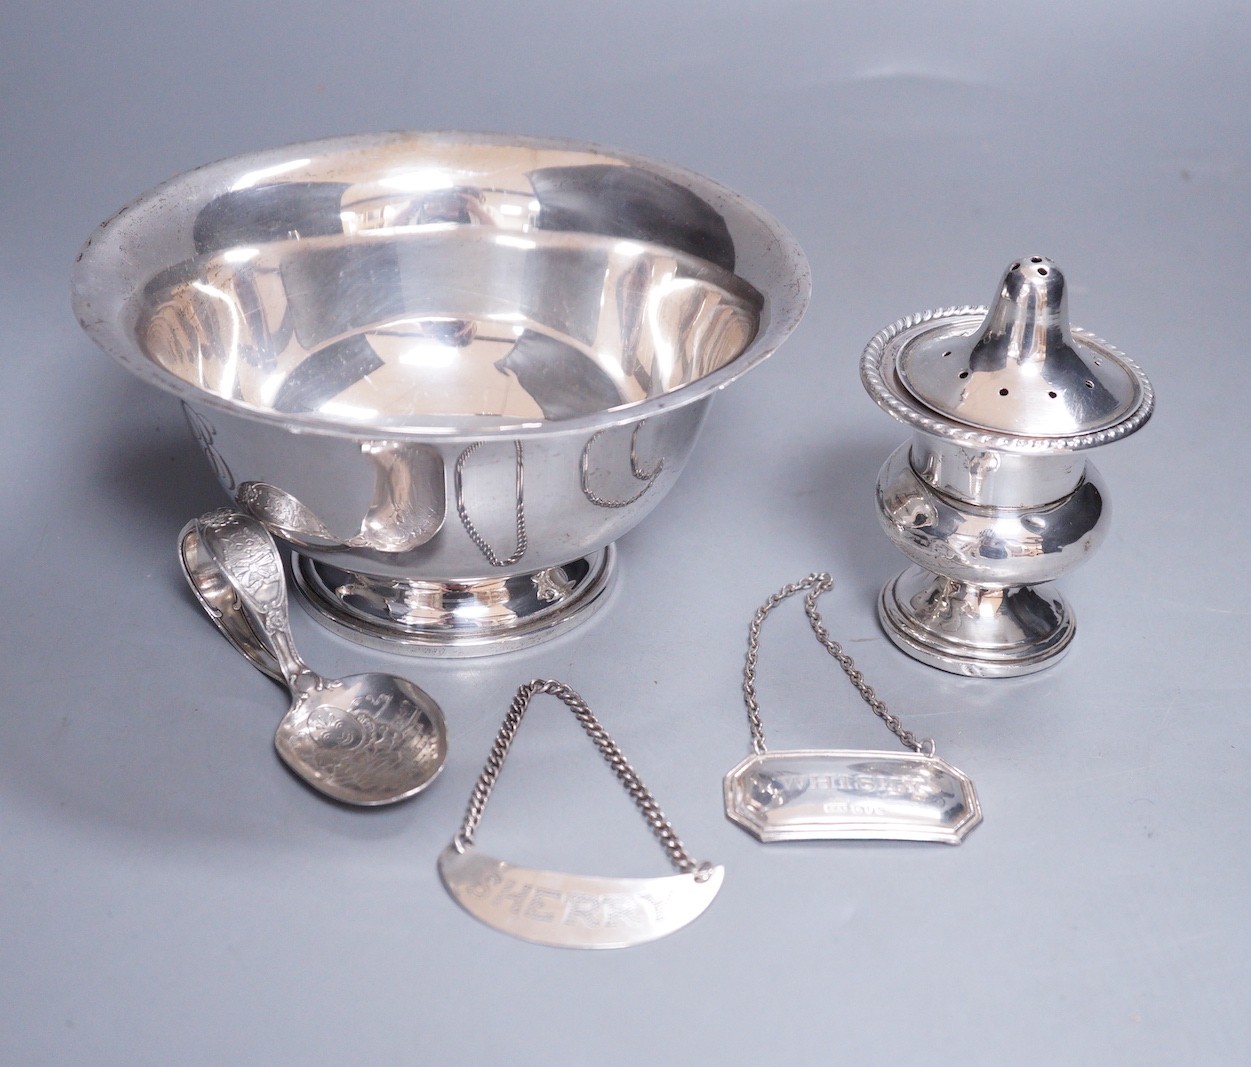 A group of small silver and white metal items including a sterling pedestal bowl. sterling 'Humpty Dumpty' child's spoon, a silver wine label, a sterling wine label, pierced silver lid and a sterling small vase